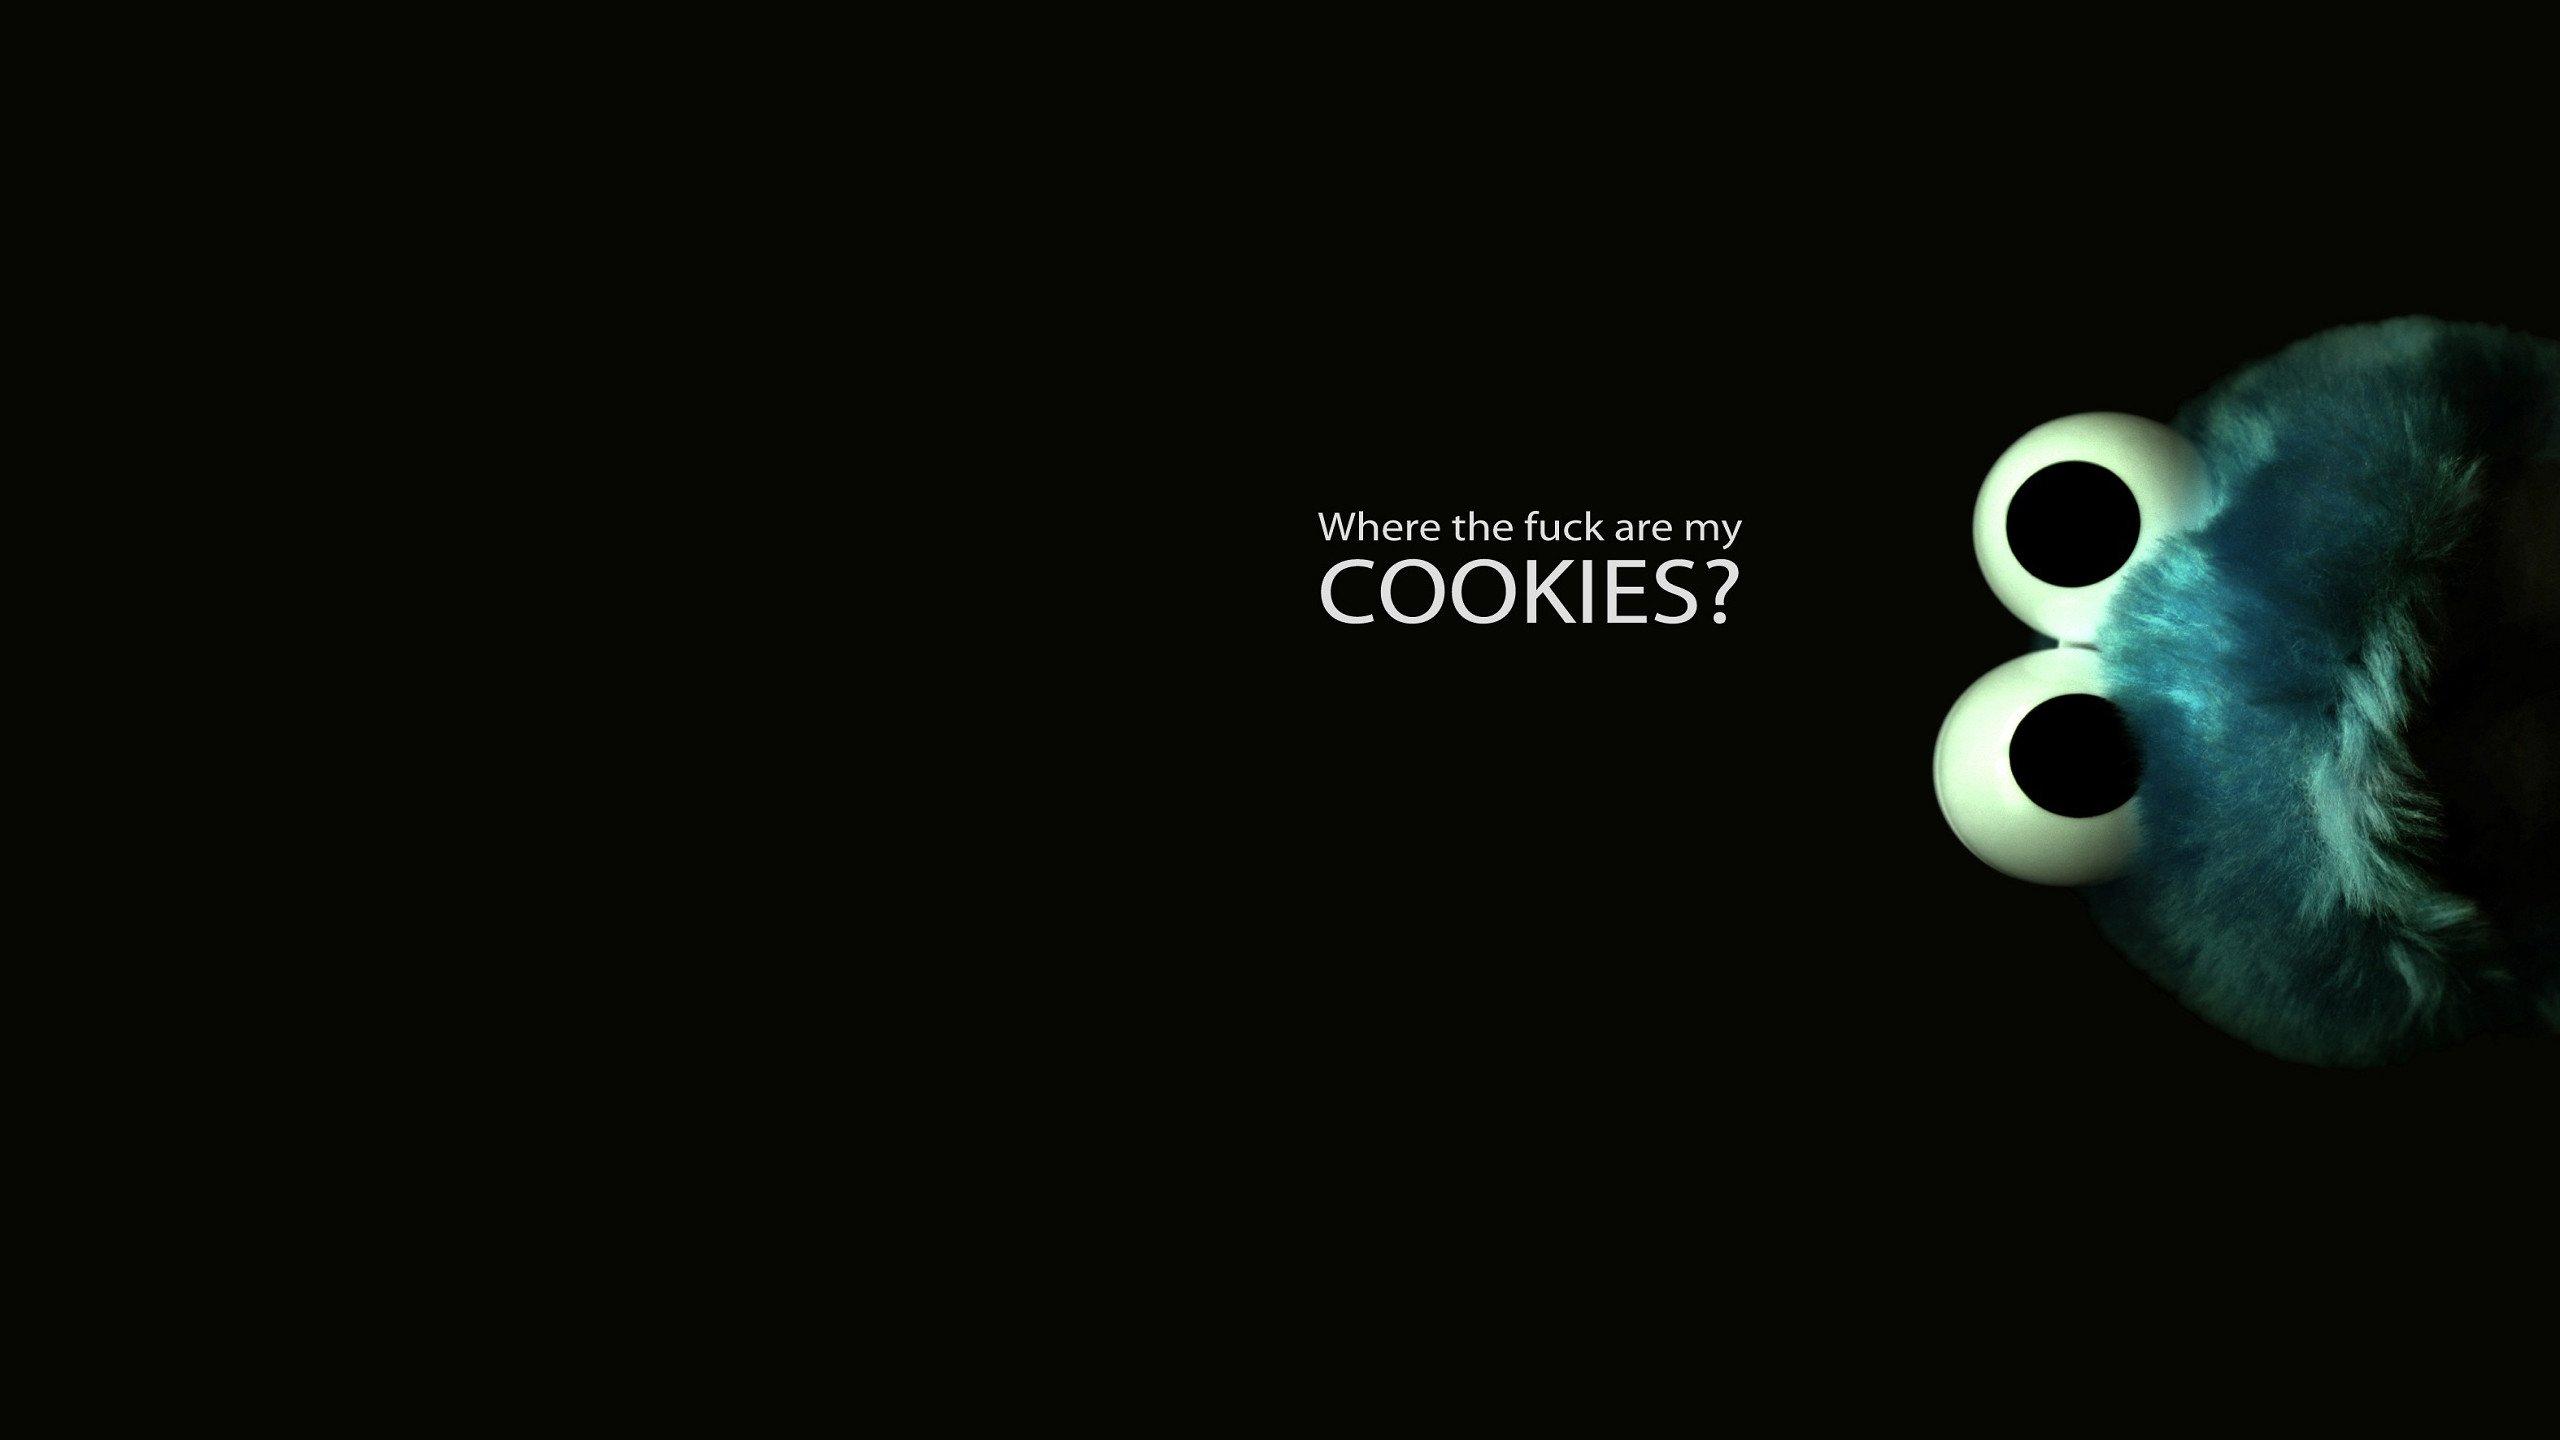 Where the f*ck are my cookies? [2 560 x 1 440]